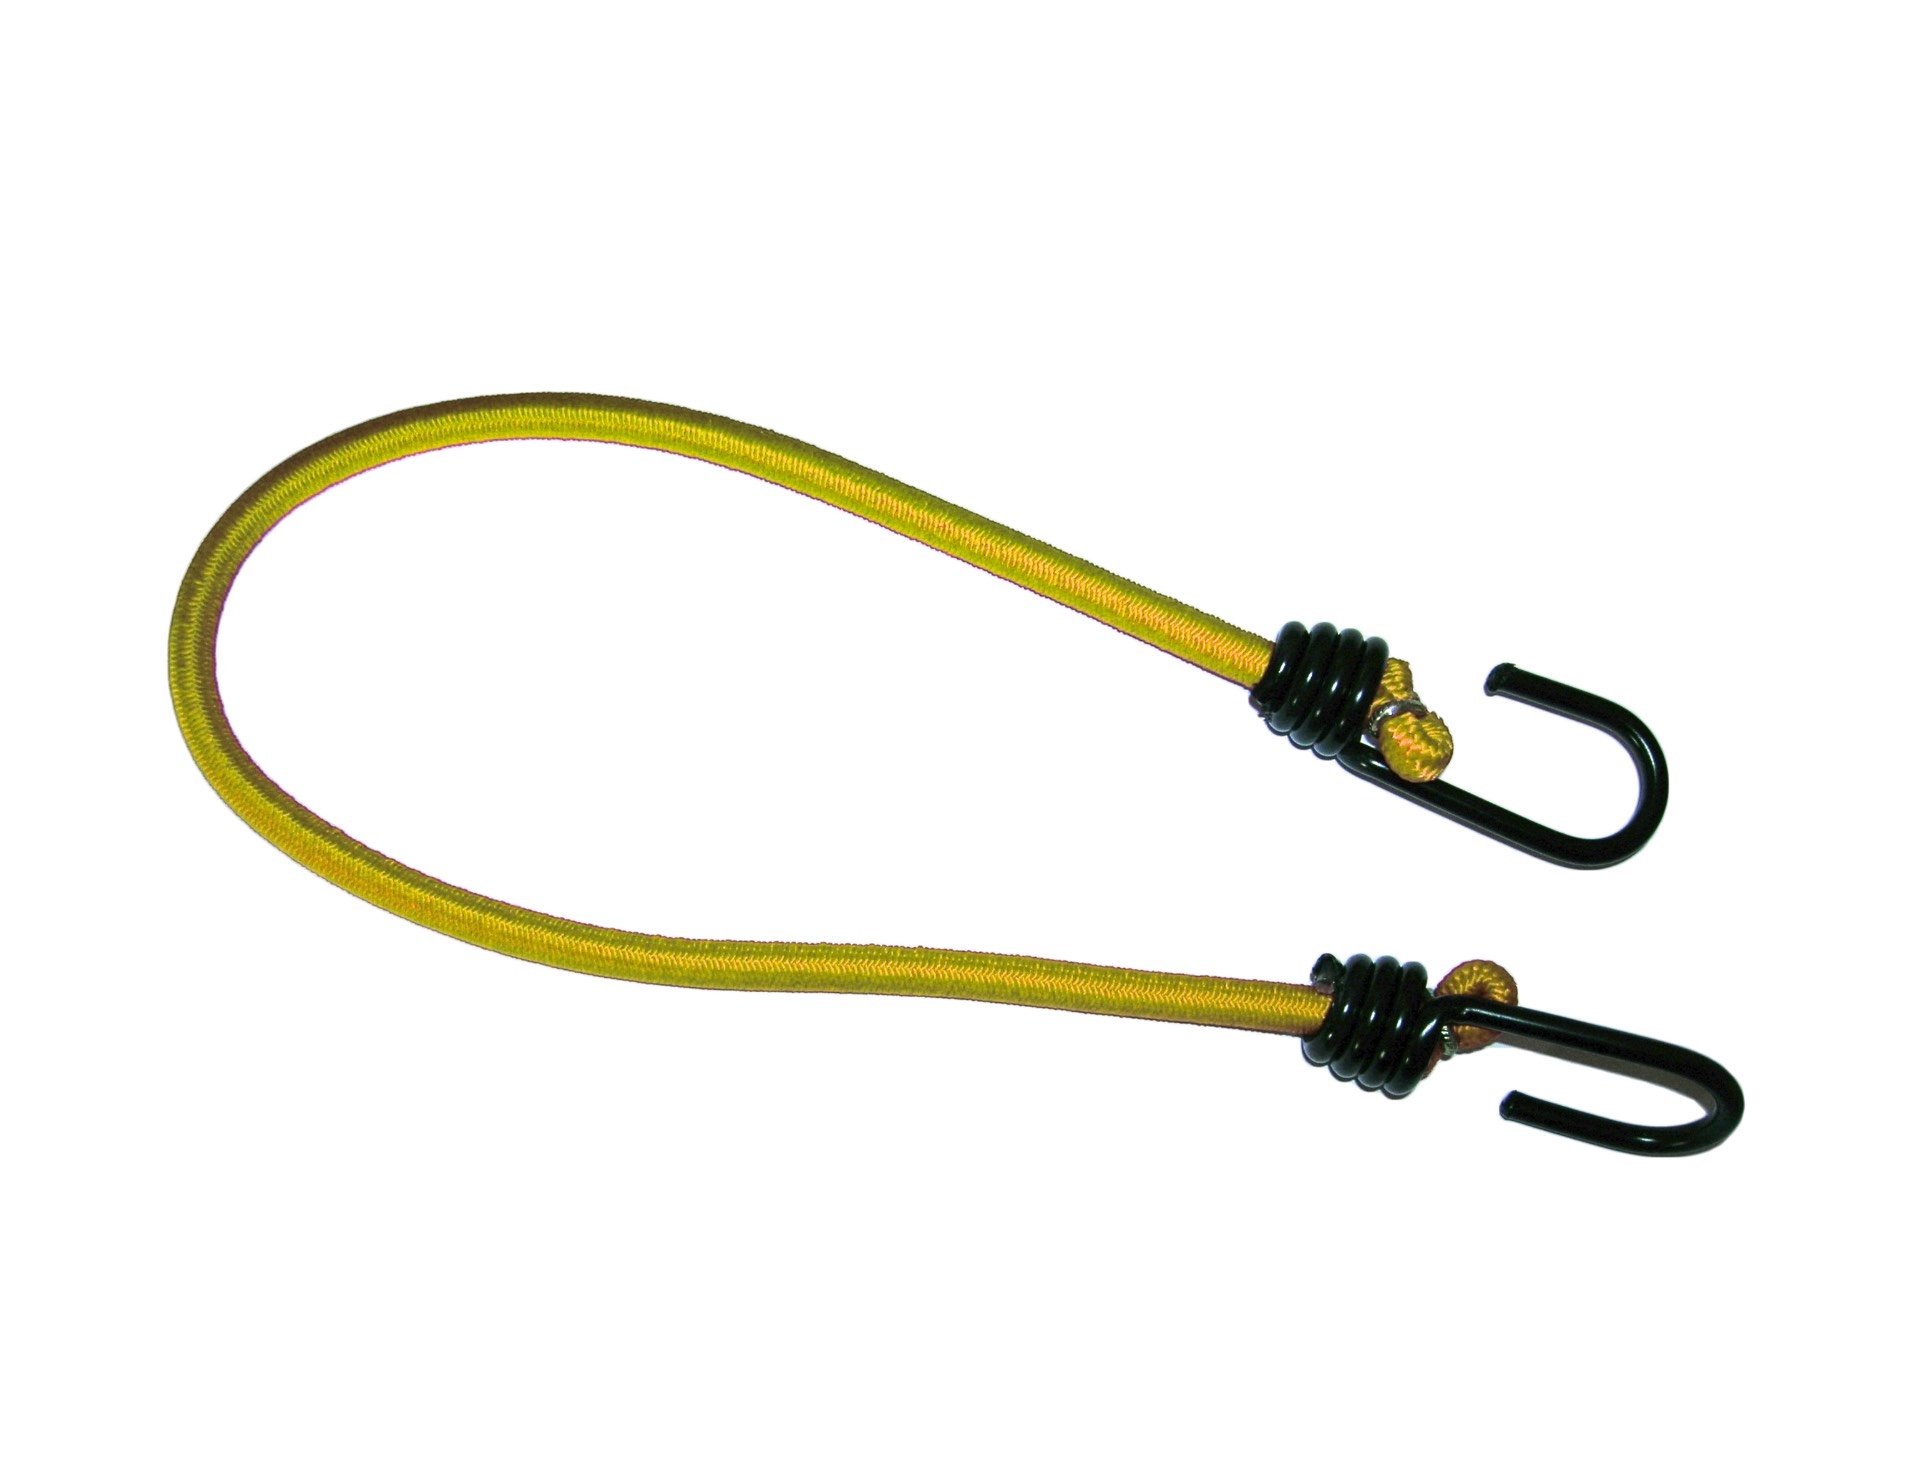 Bungee/Ocky Cord HD 122 Cm With Hooks